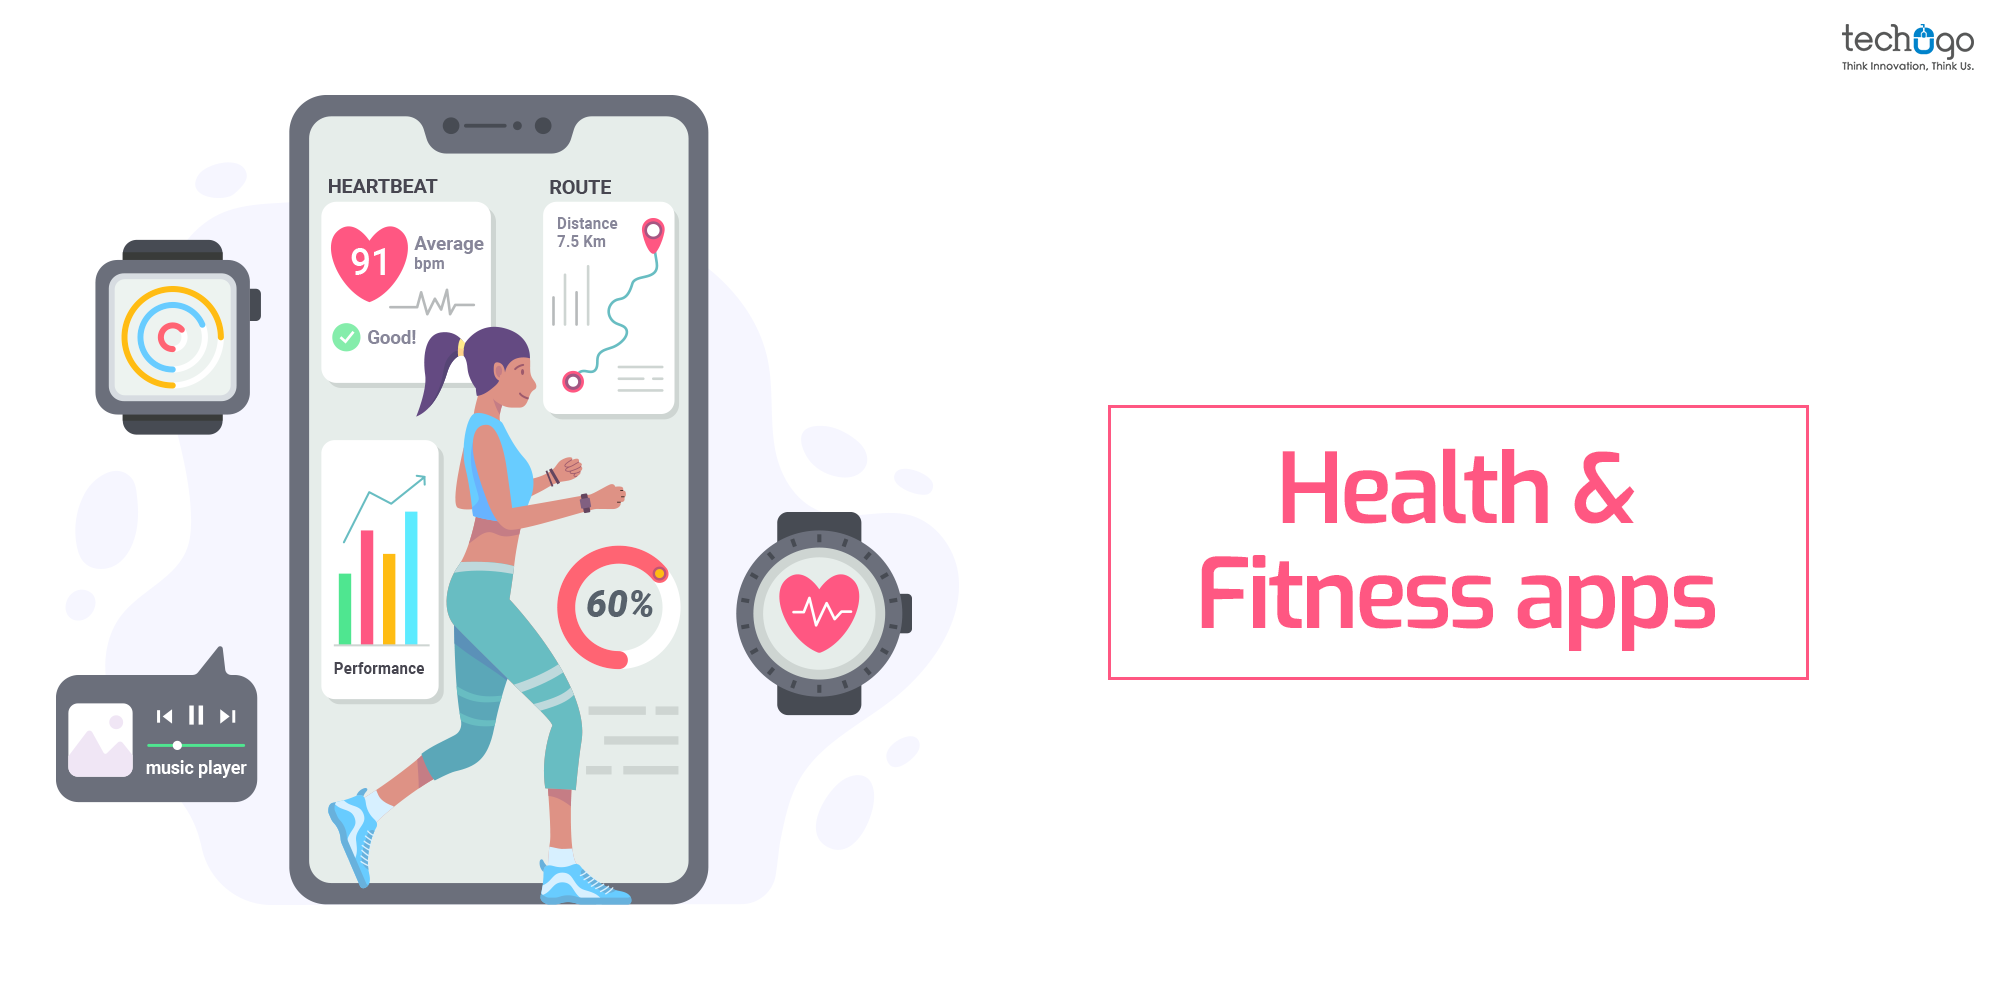 Health & Fitness apps